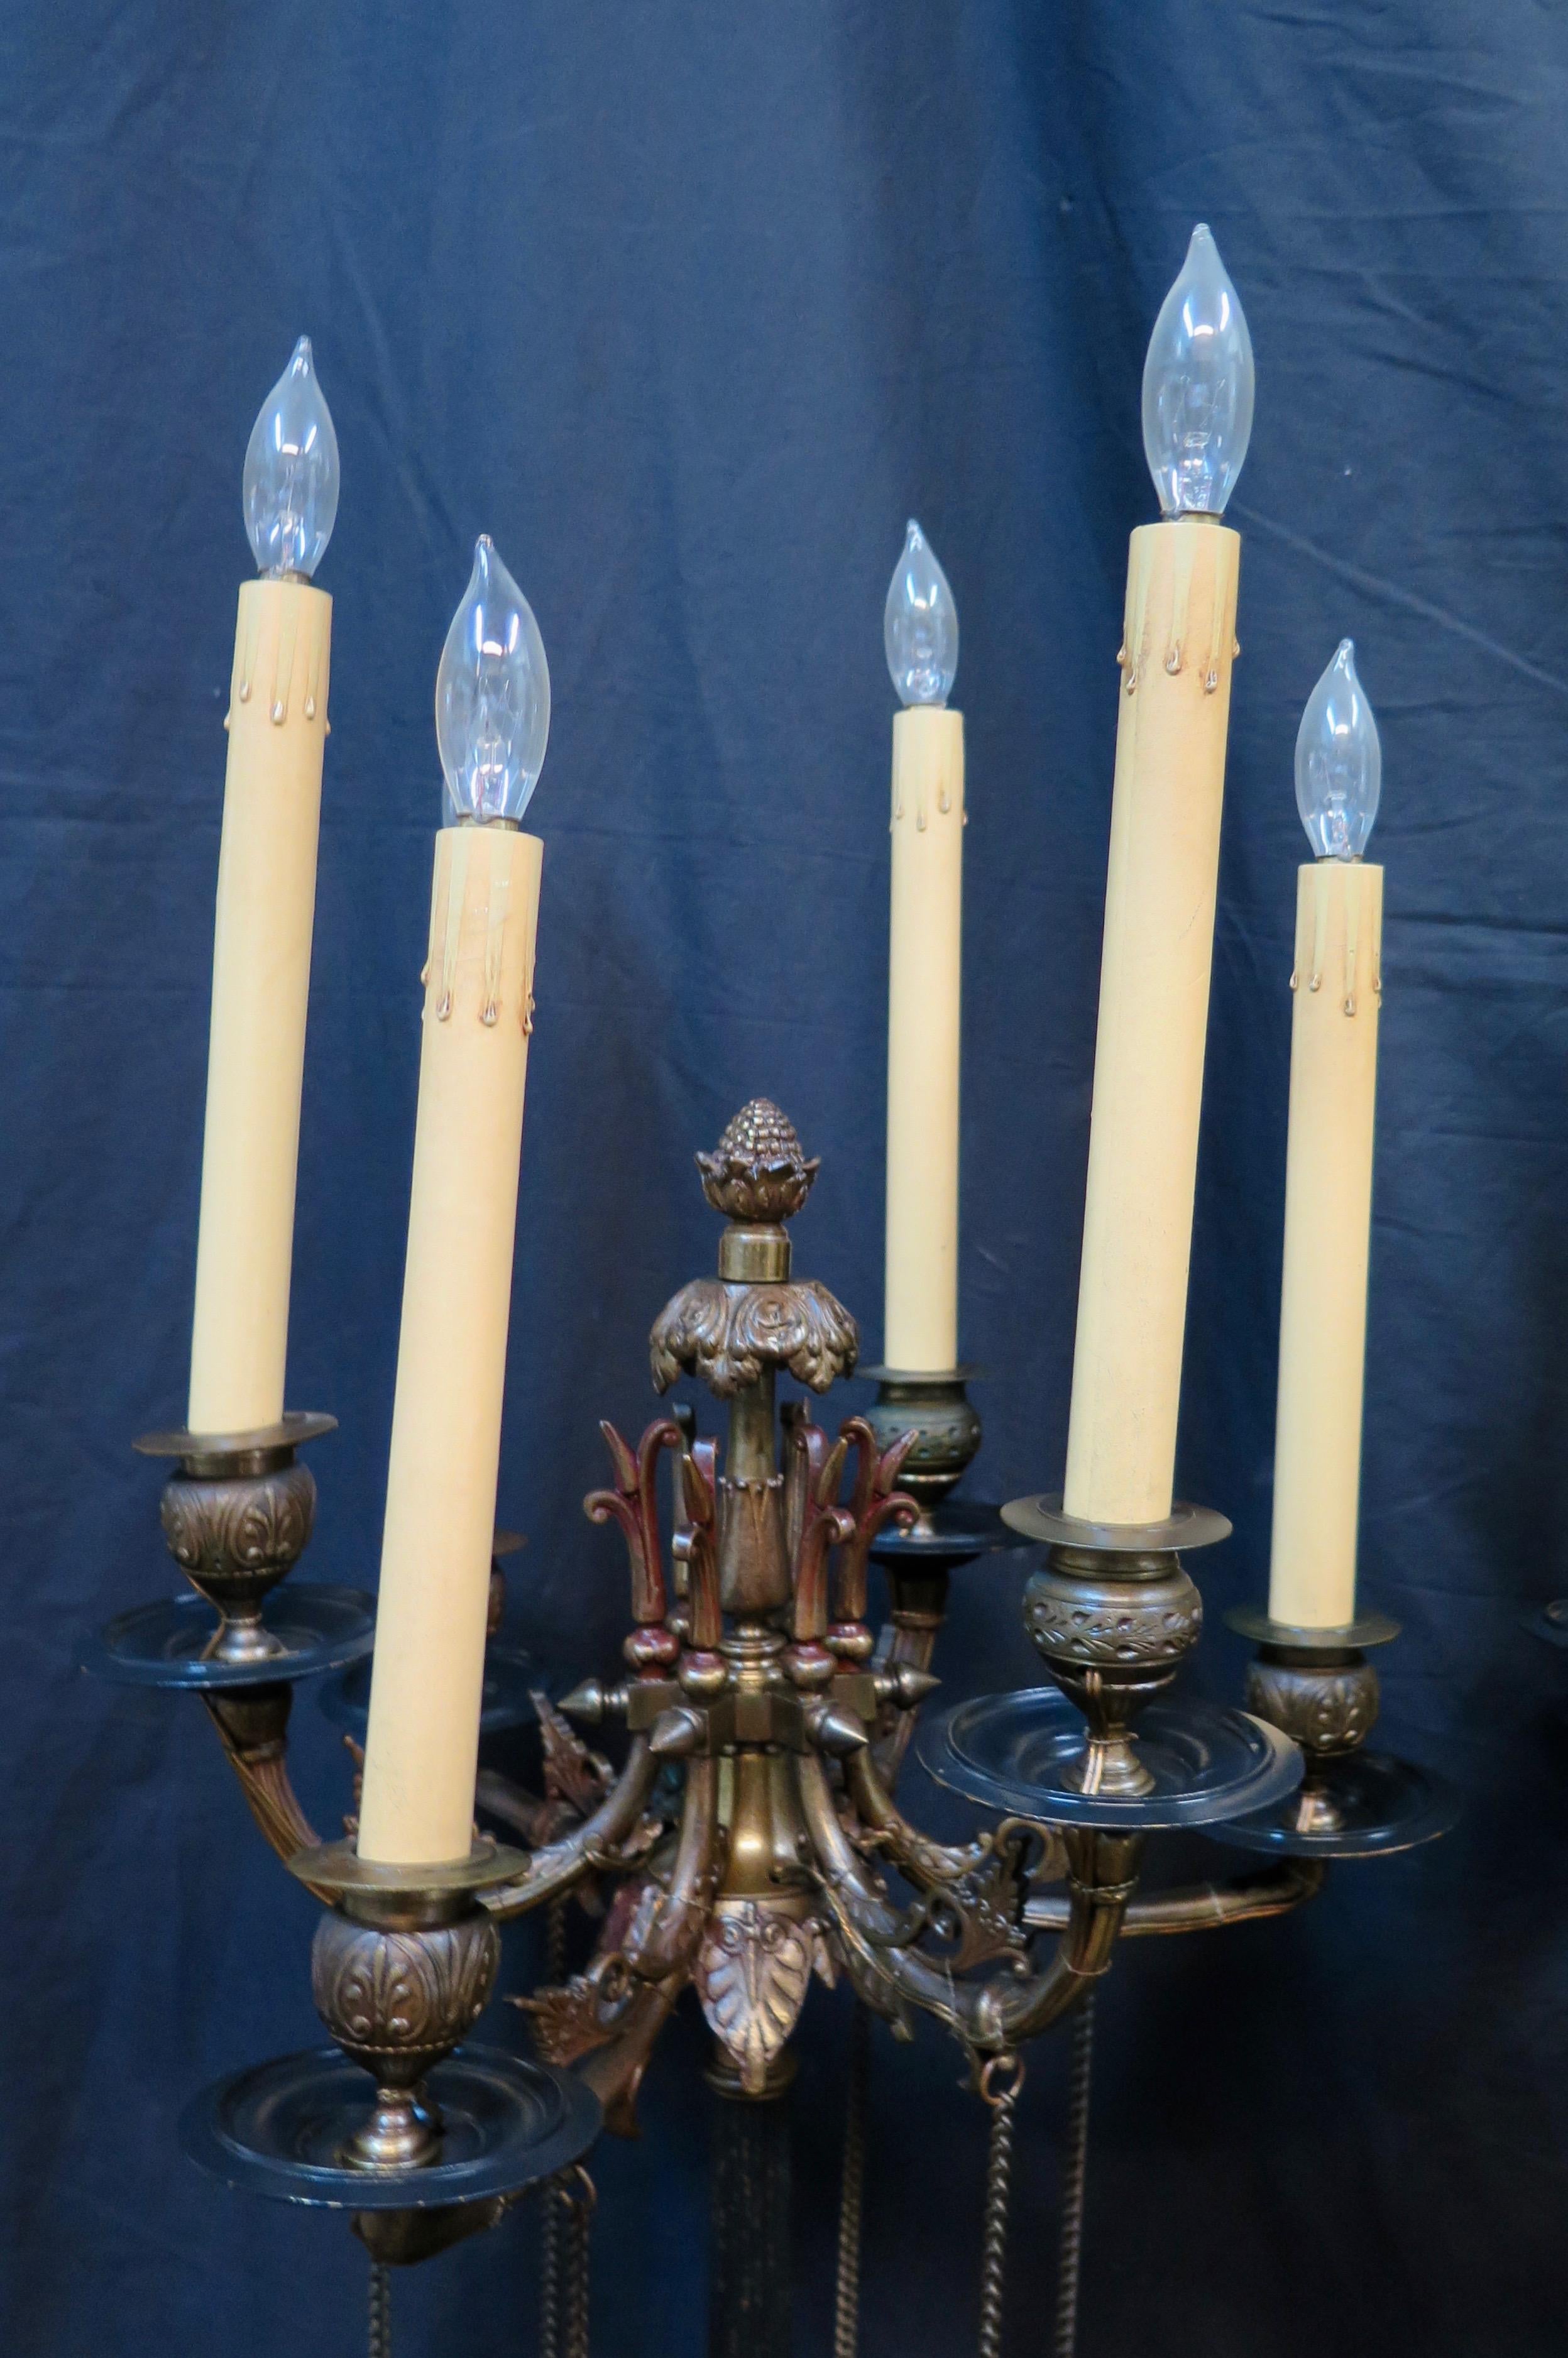 These vintage Edwardian designed tall bronze candelabra lamps are elegantly decorated with a stylish blackened columns and matching bobeche accents. Each six light lamp features extended curved candlestick arms festooned with chaining. Sturdy bronze